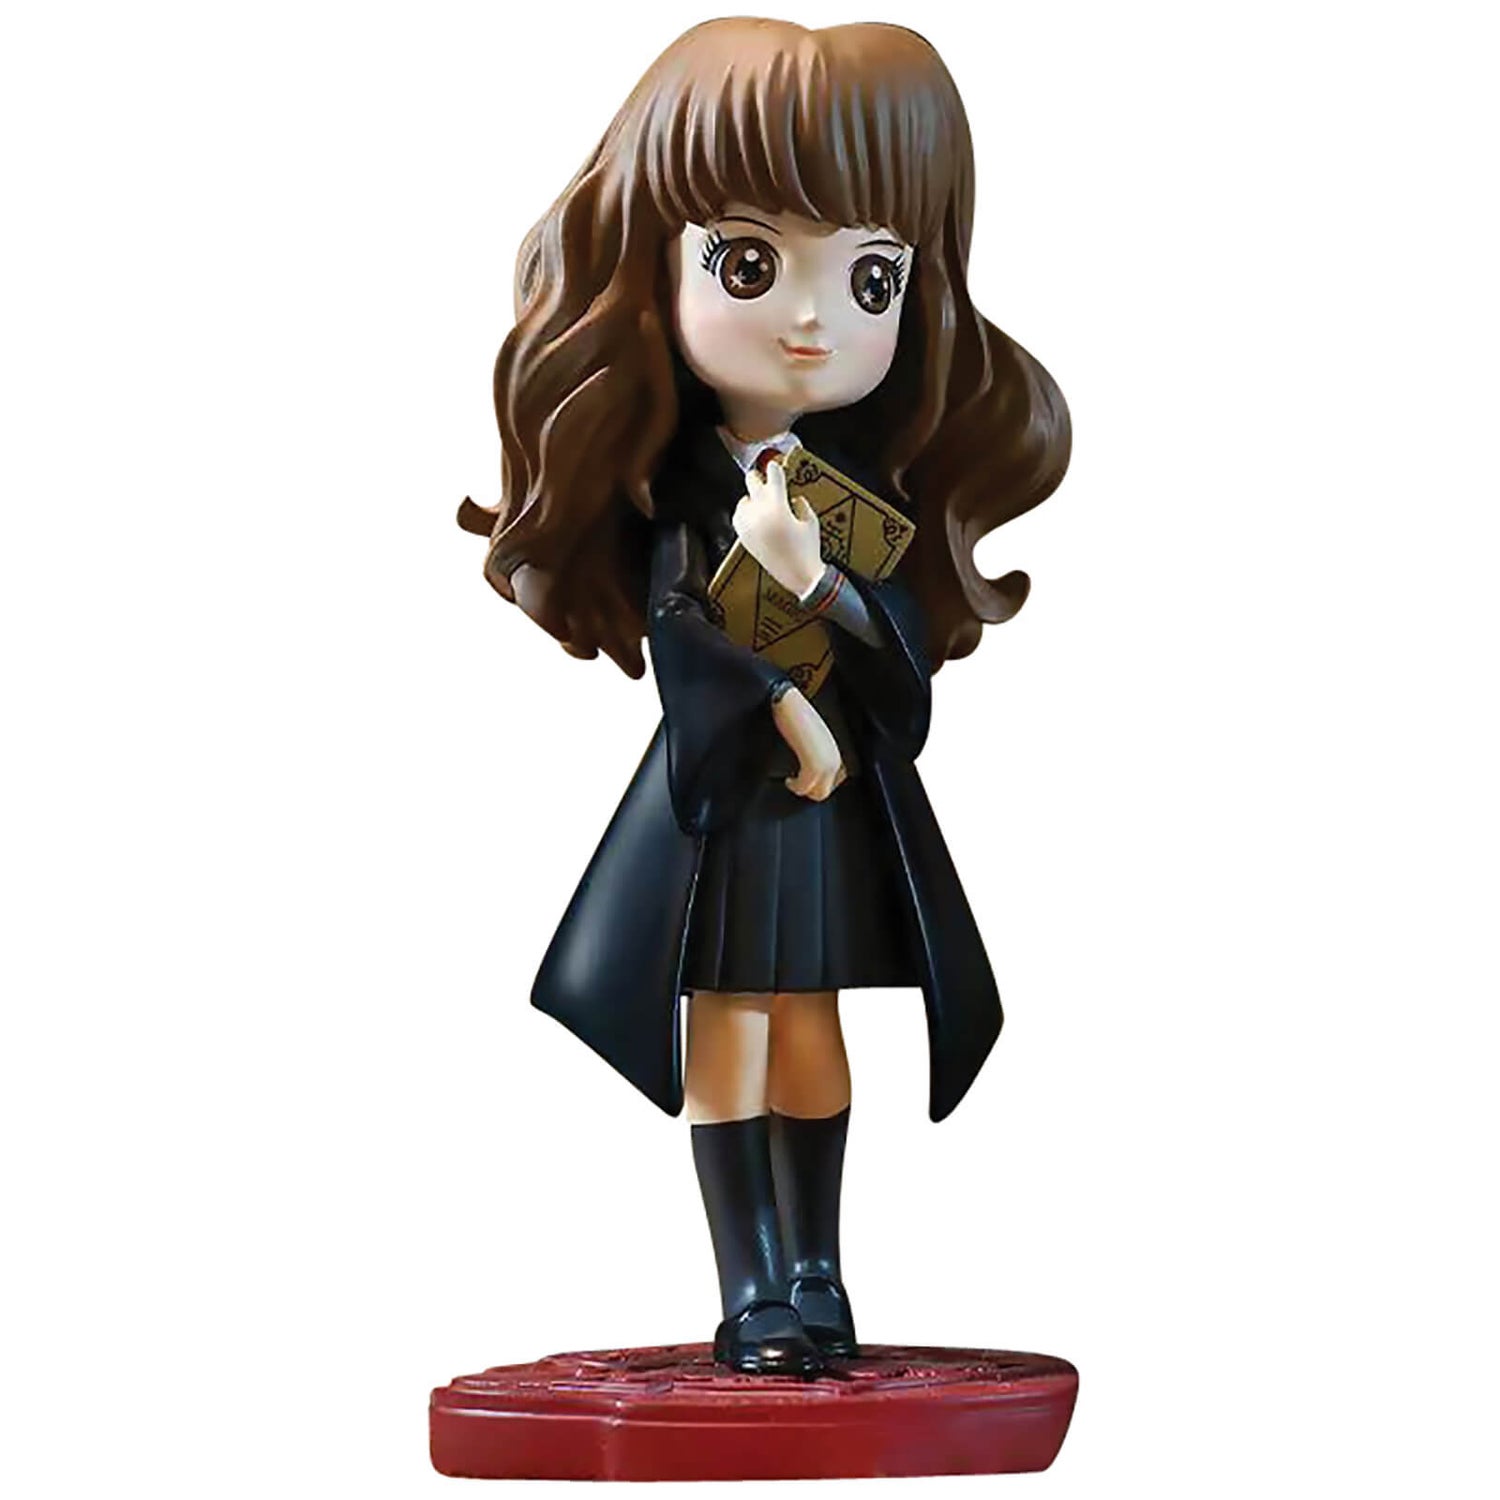 The Wizarding World Of Harry Potter Hermione Granger Figurine